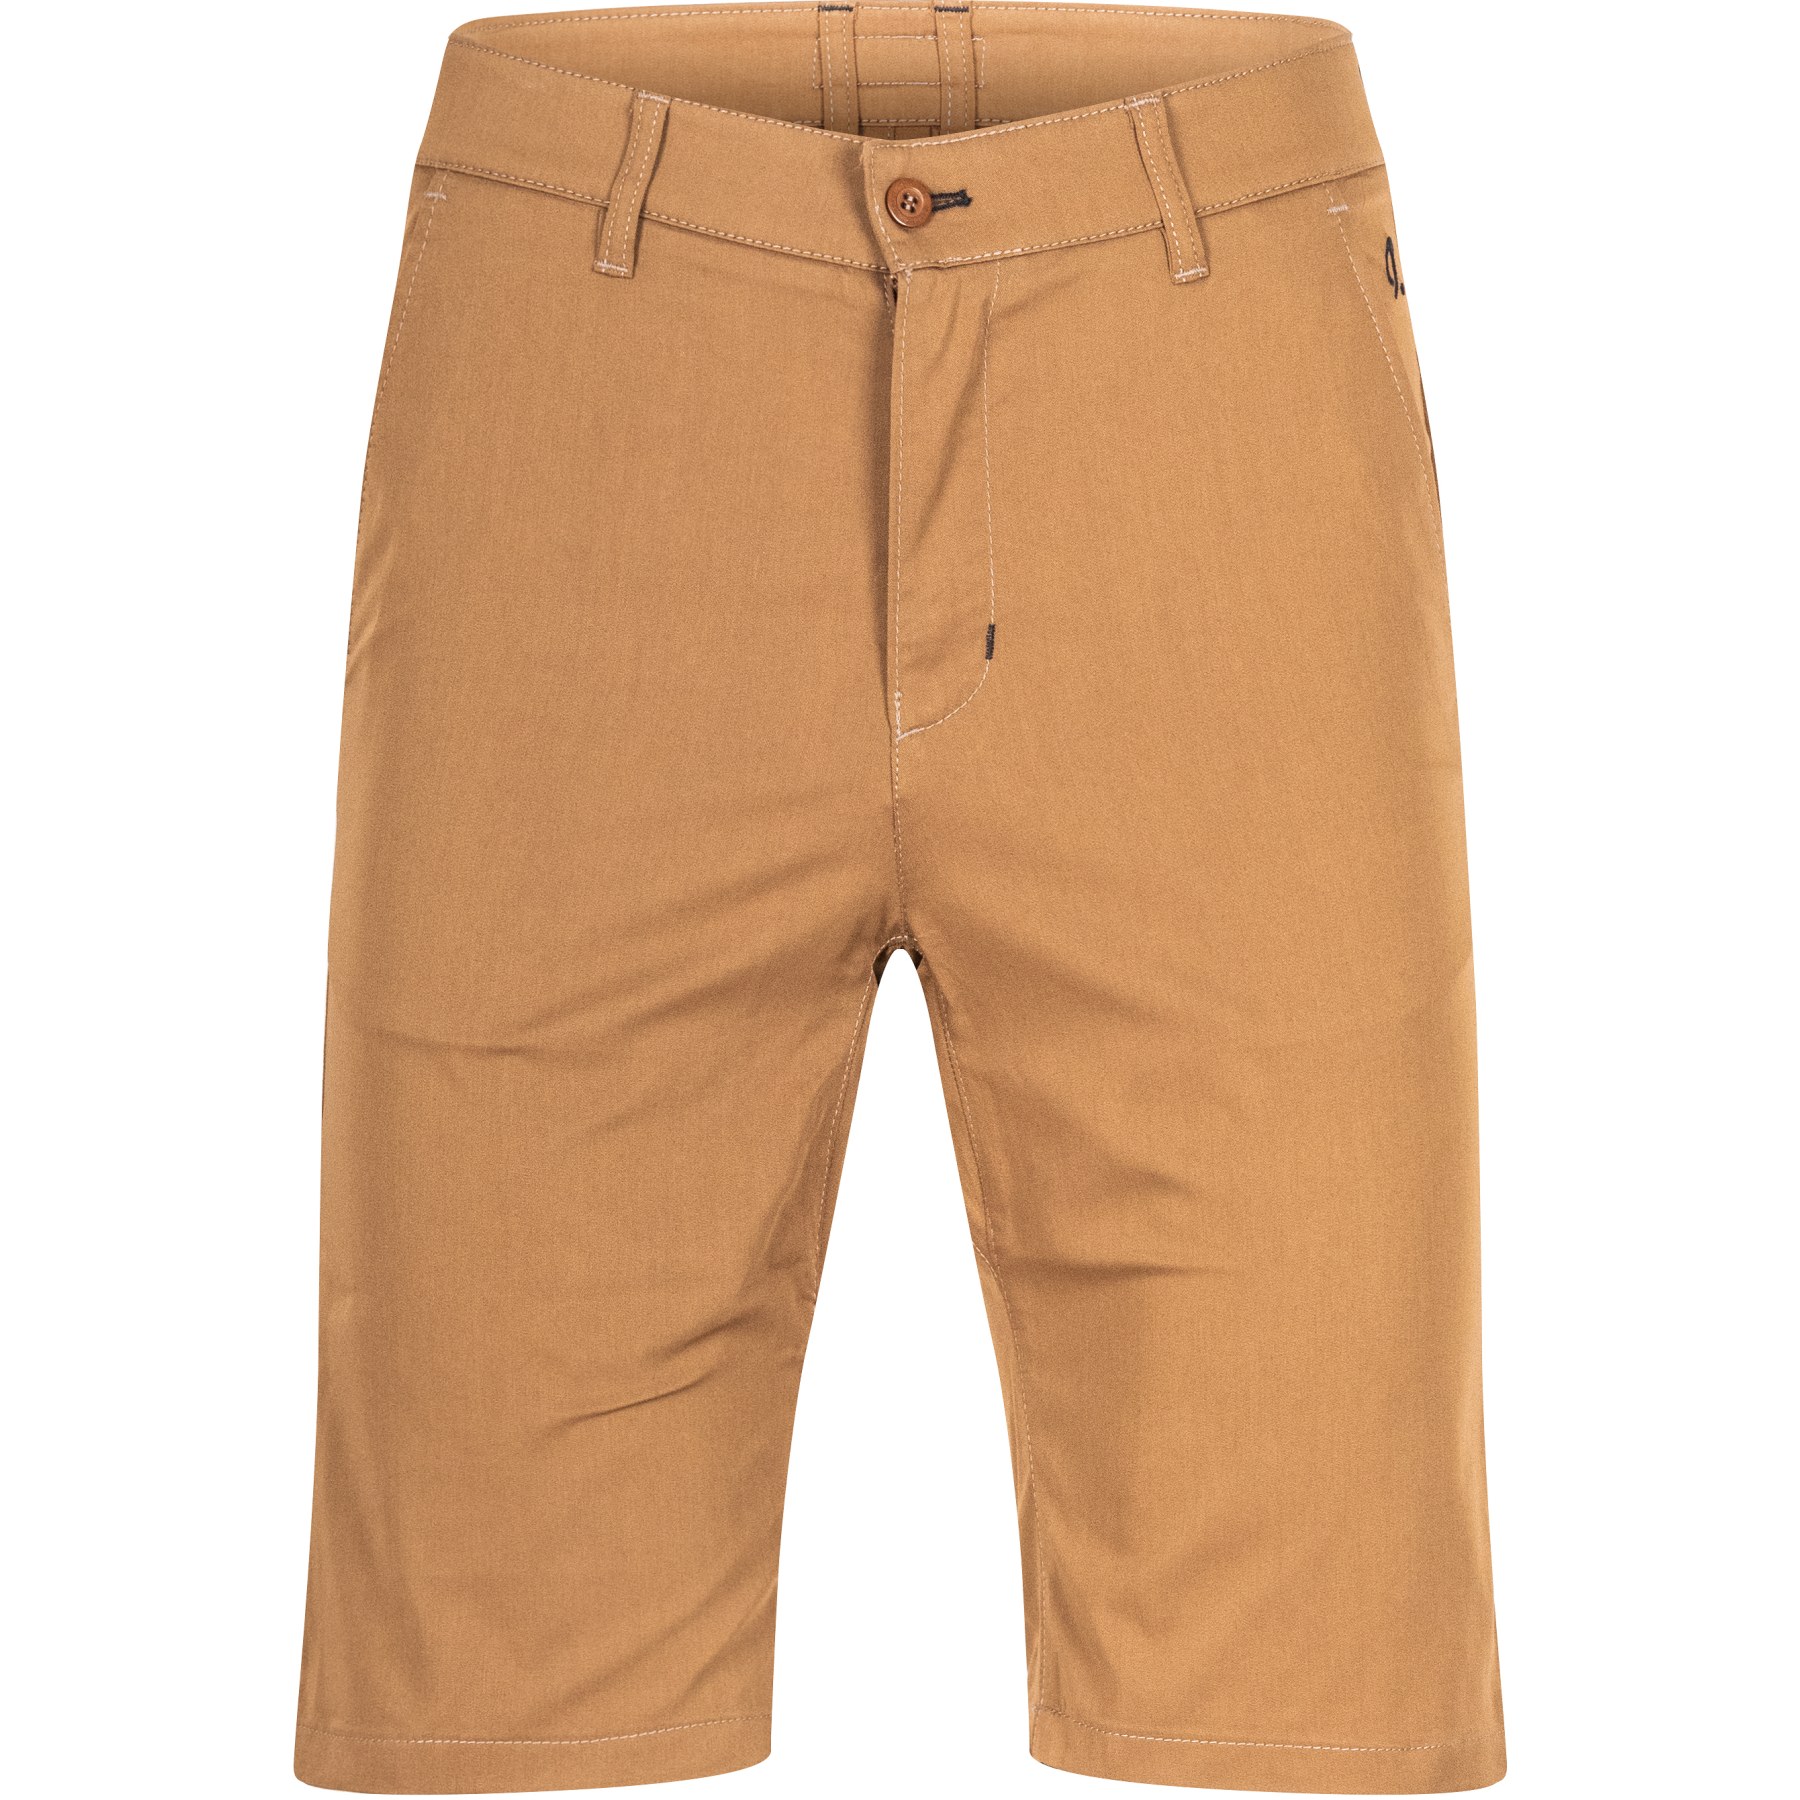 Picture of Isadore Urban Shorts - Khaki